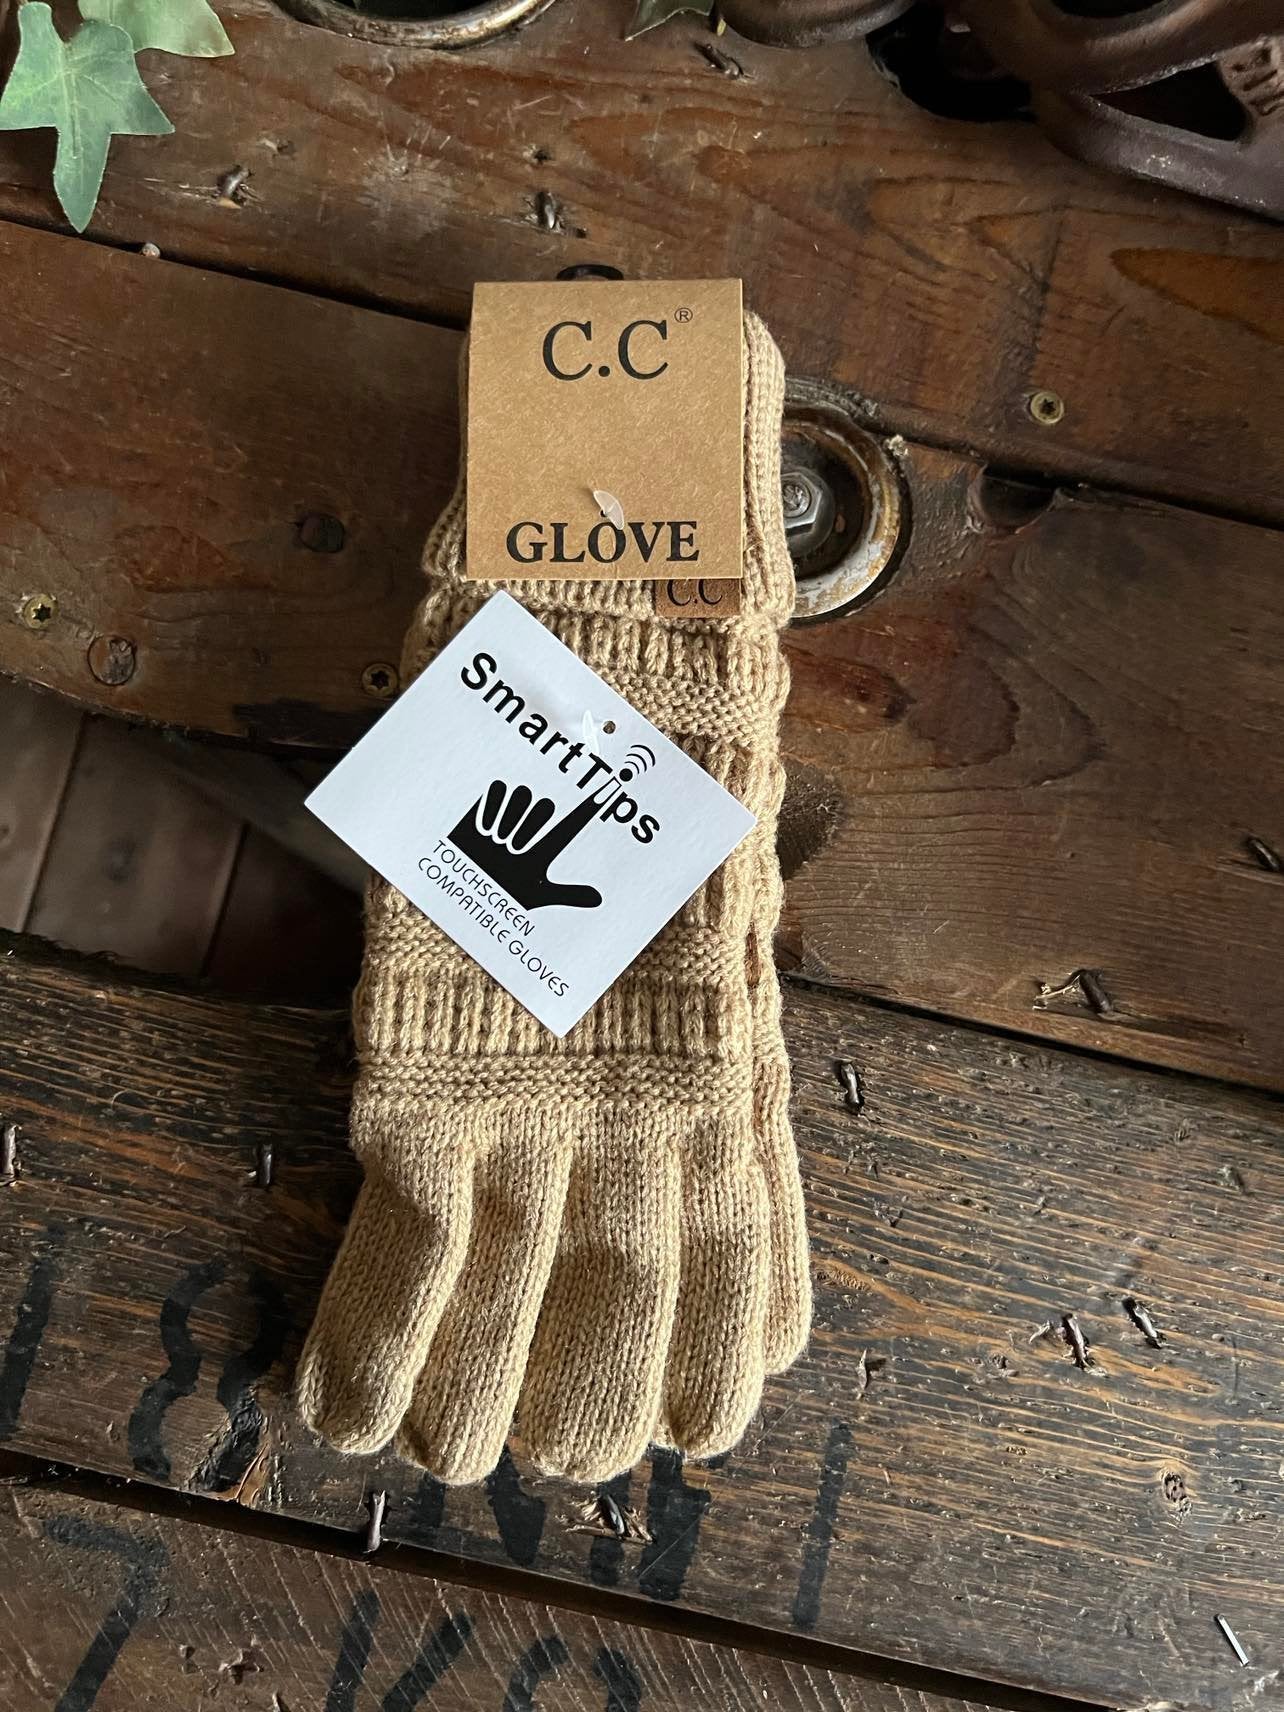 CC Beanies Gloves - Unlined-Beanie/Gloves-C.C Beanies-Lucky J Boots & More, Women's, Men's, & Kids Western Store Located in Carthage, MO